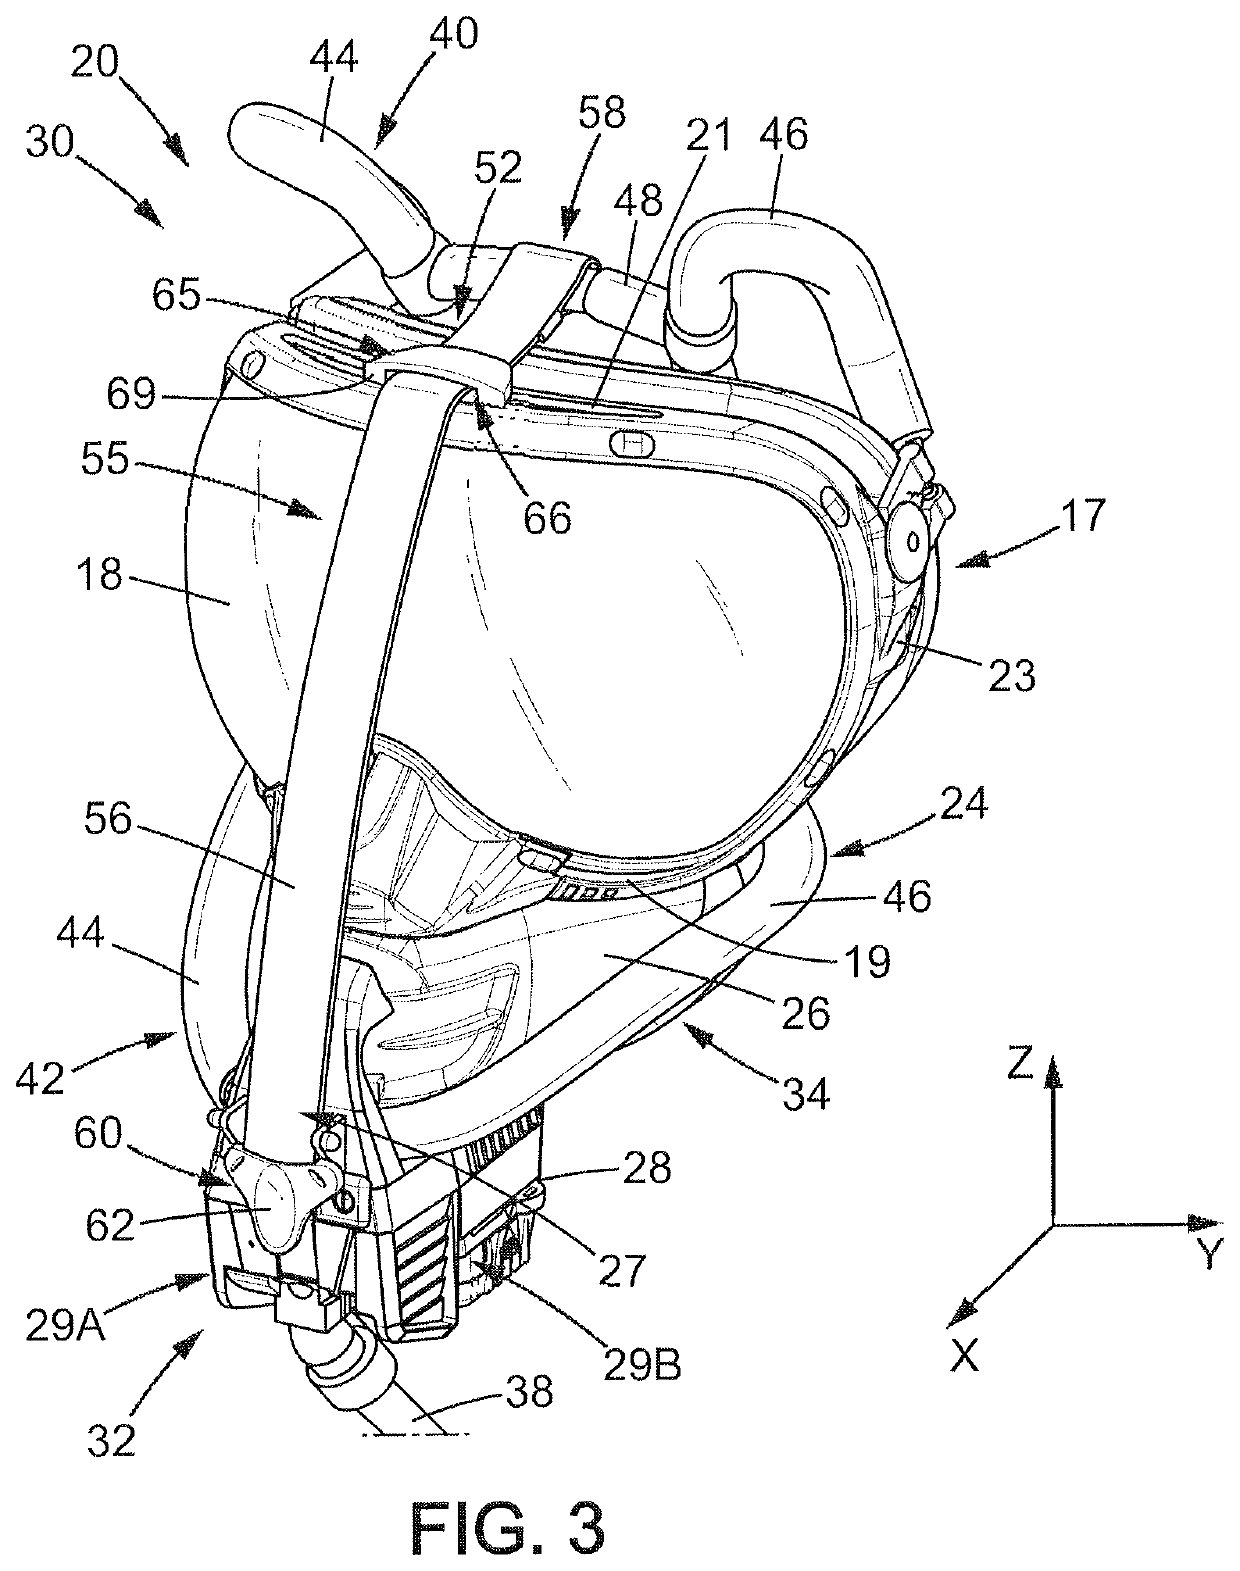 Breathing mask for aircraft and method for putting a breathing mask in folded position for storage in a storage unit